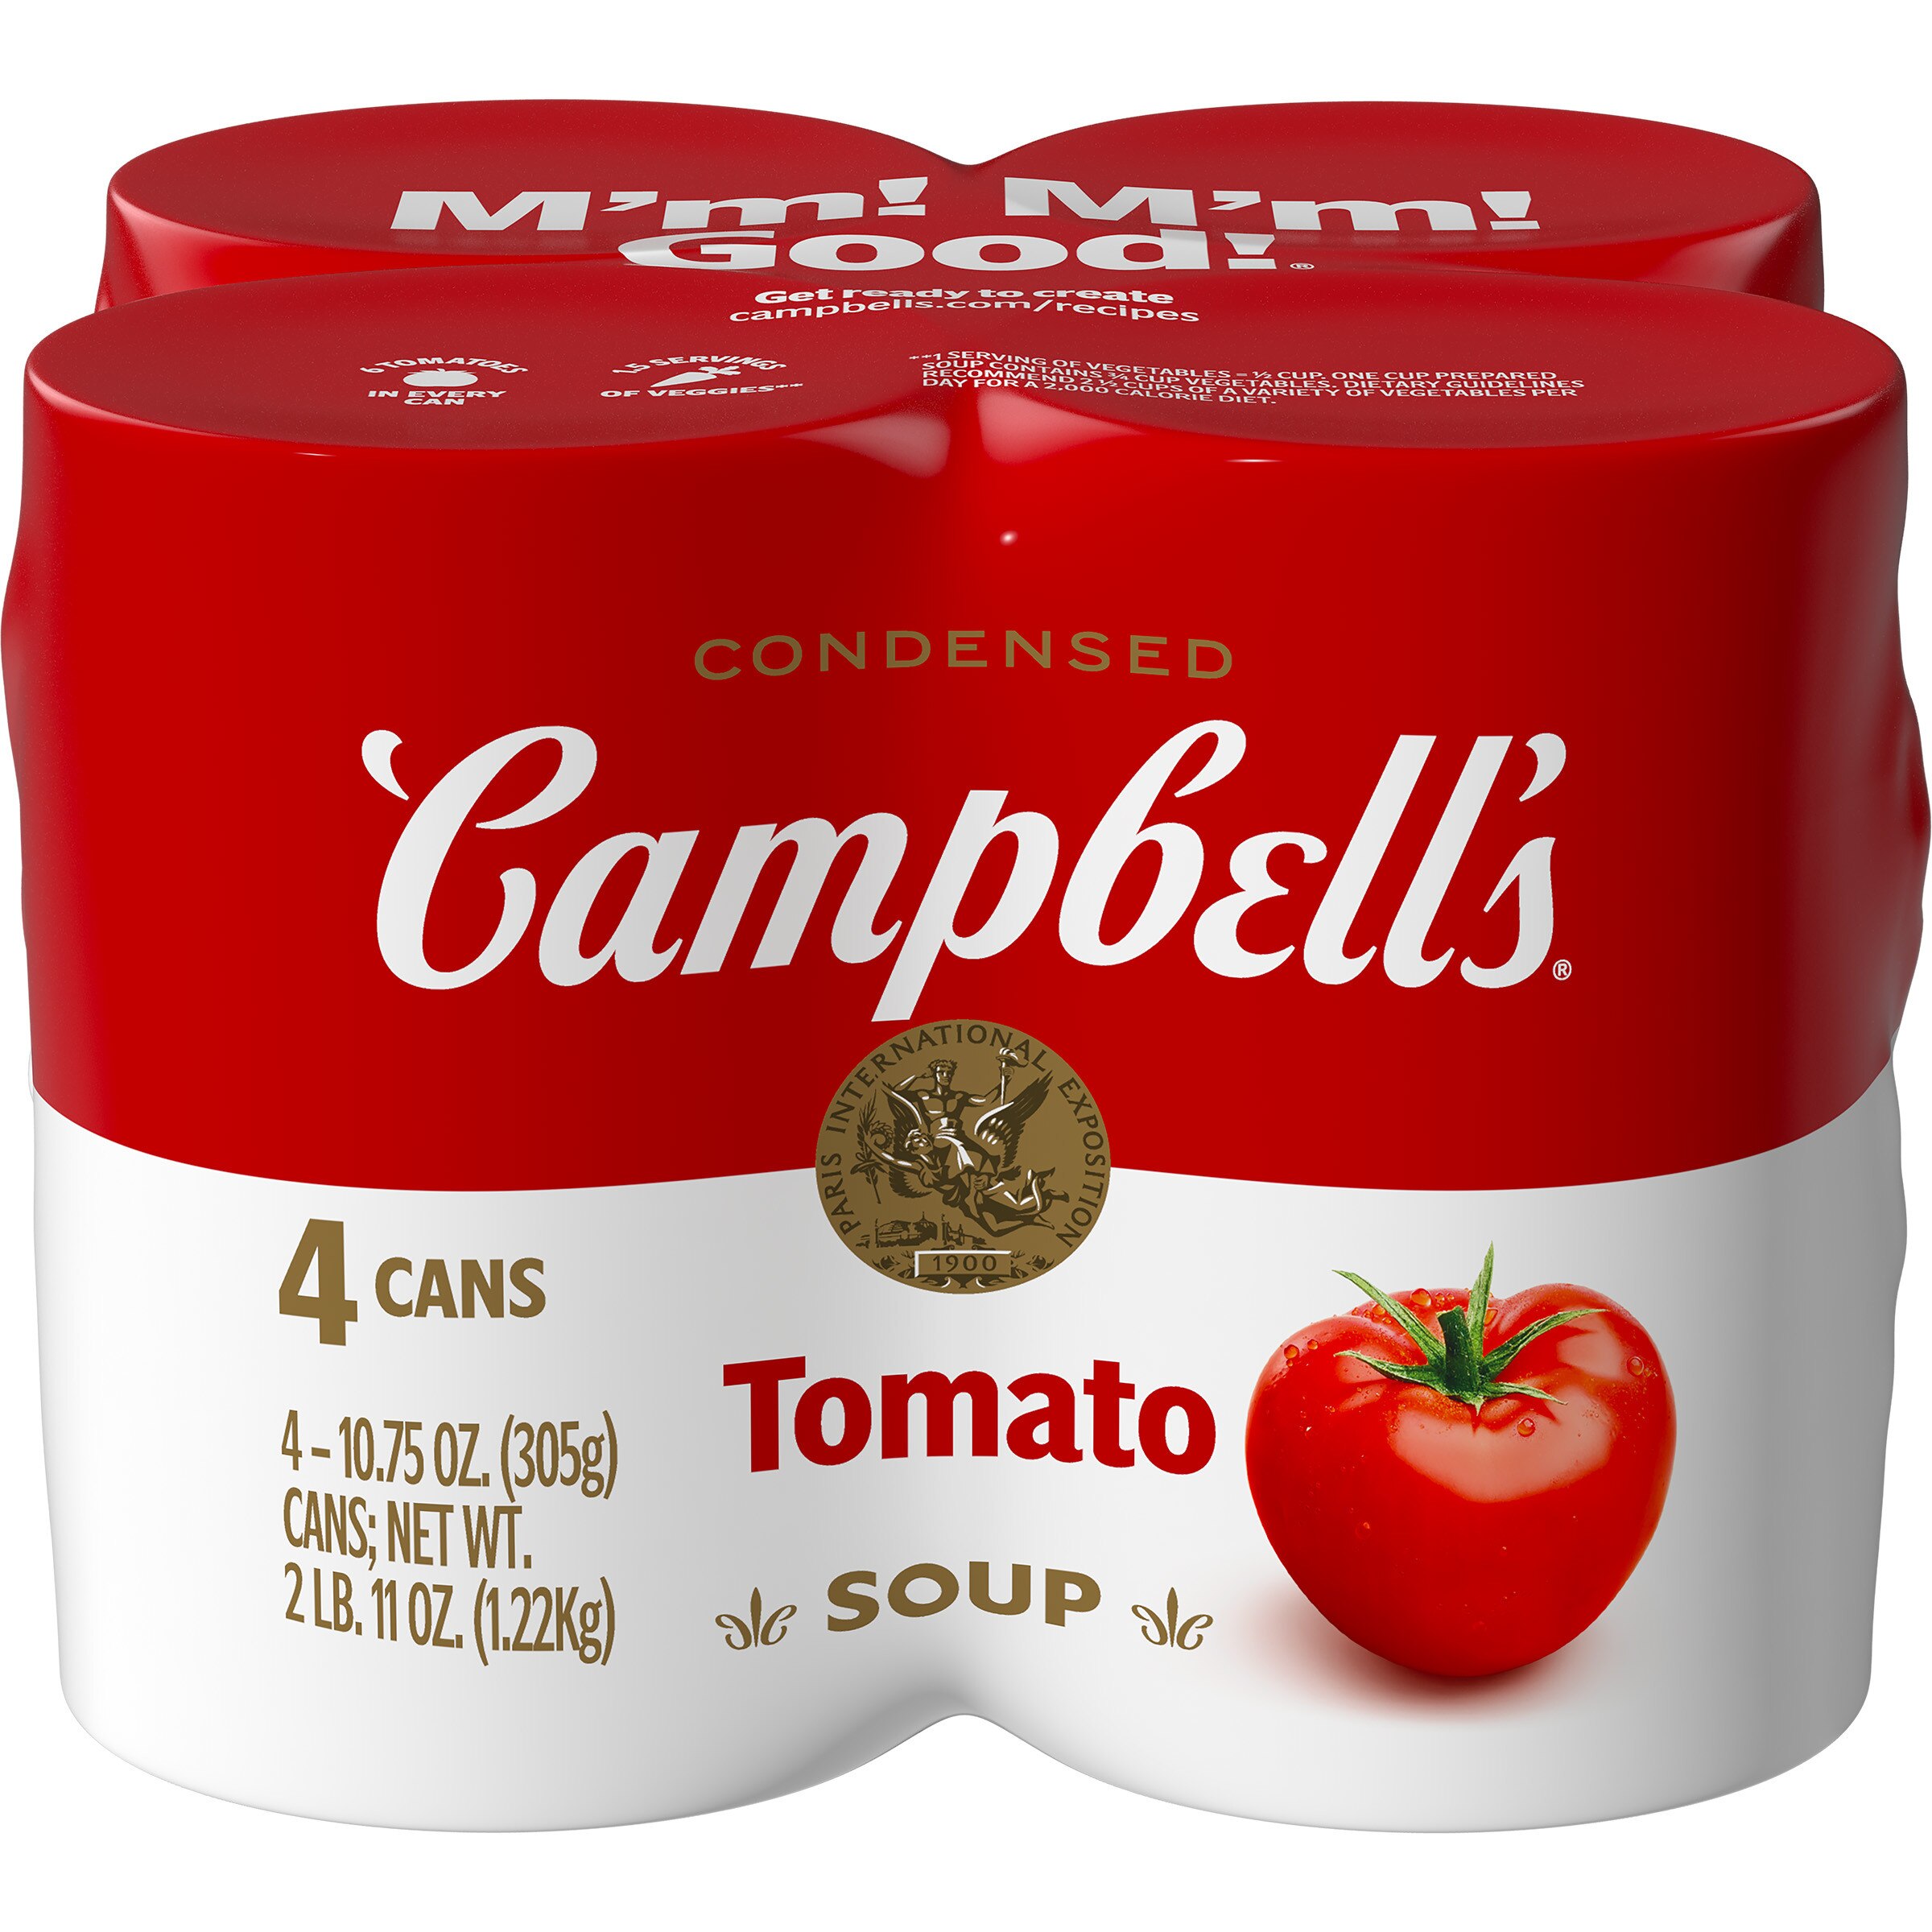 Campbell's Condensed Tomato Soup, 10.75 OZ Cans, 4 PK